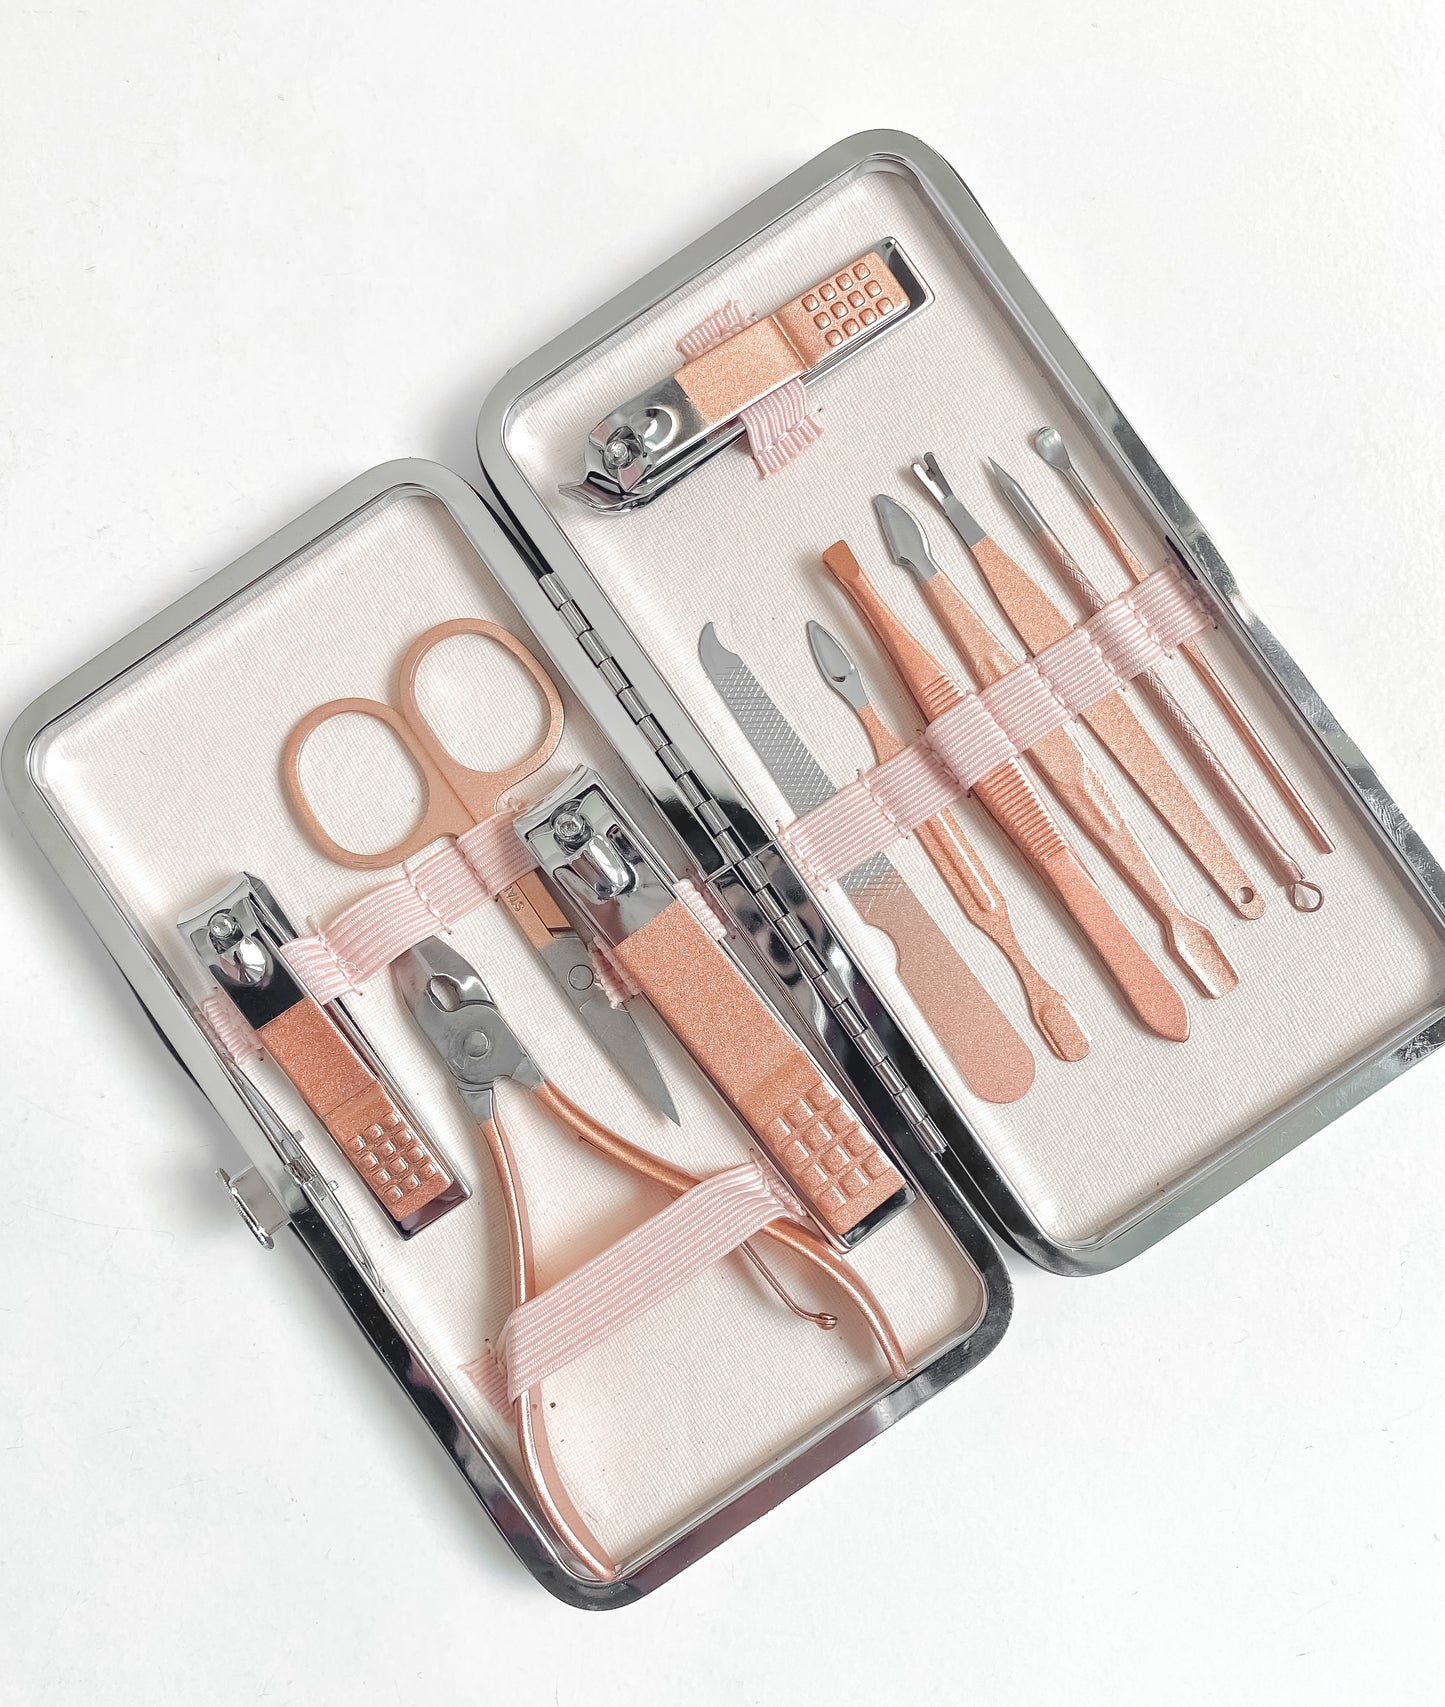 All in One Manicure Set - ididanail